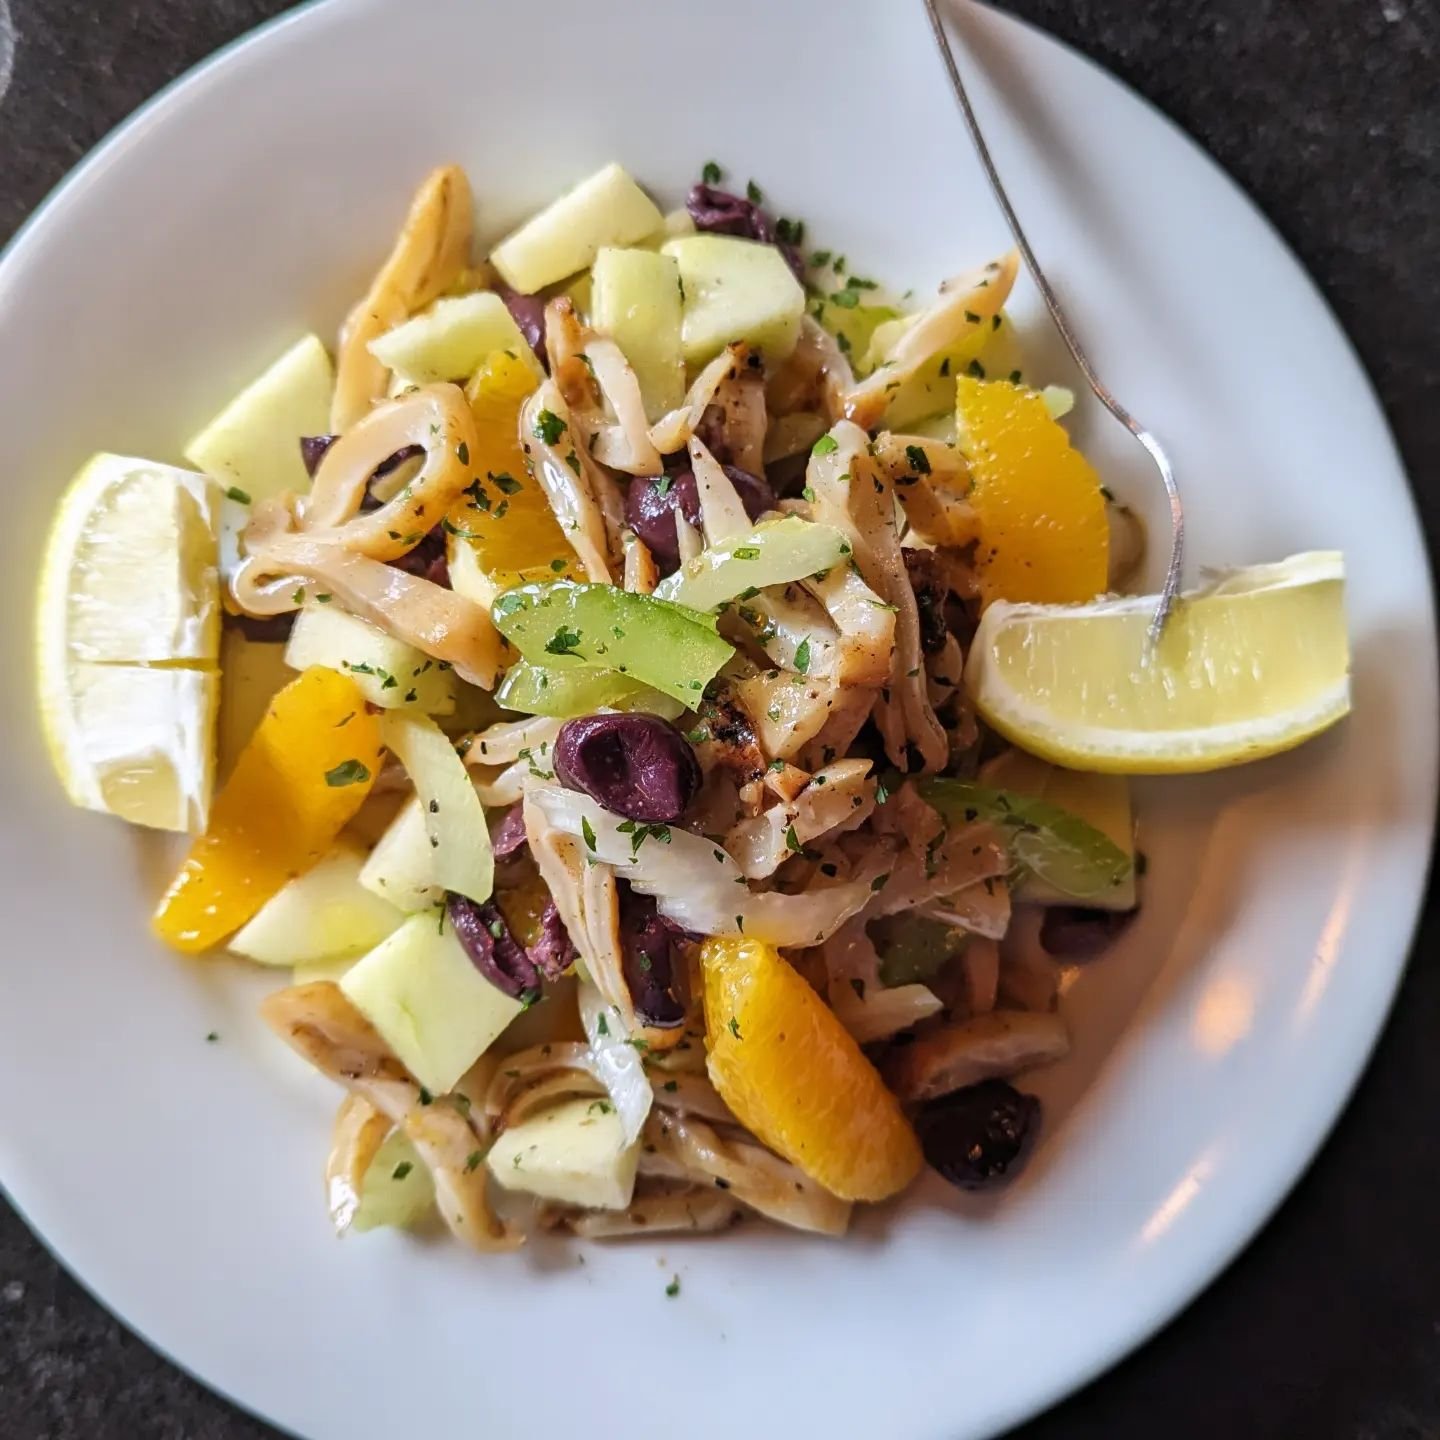 🦑 Today's Grilled Calamari Salad with apples, celery, olives &amp; citrus infused olive oil.🫒 

☎️ (914) 835-6199 for take-out &amp; reservations.
📍Harrison, NY

#trattoriavivolo #cucinaitaliana #vivolo #harrison #grilledcalamari #westchestereats 